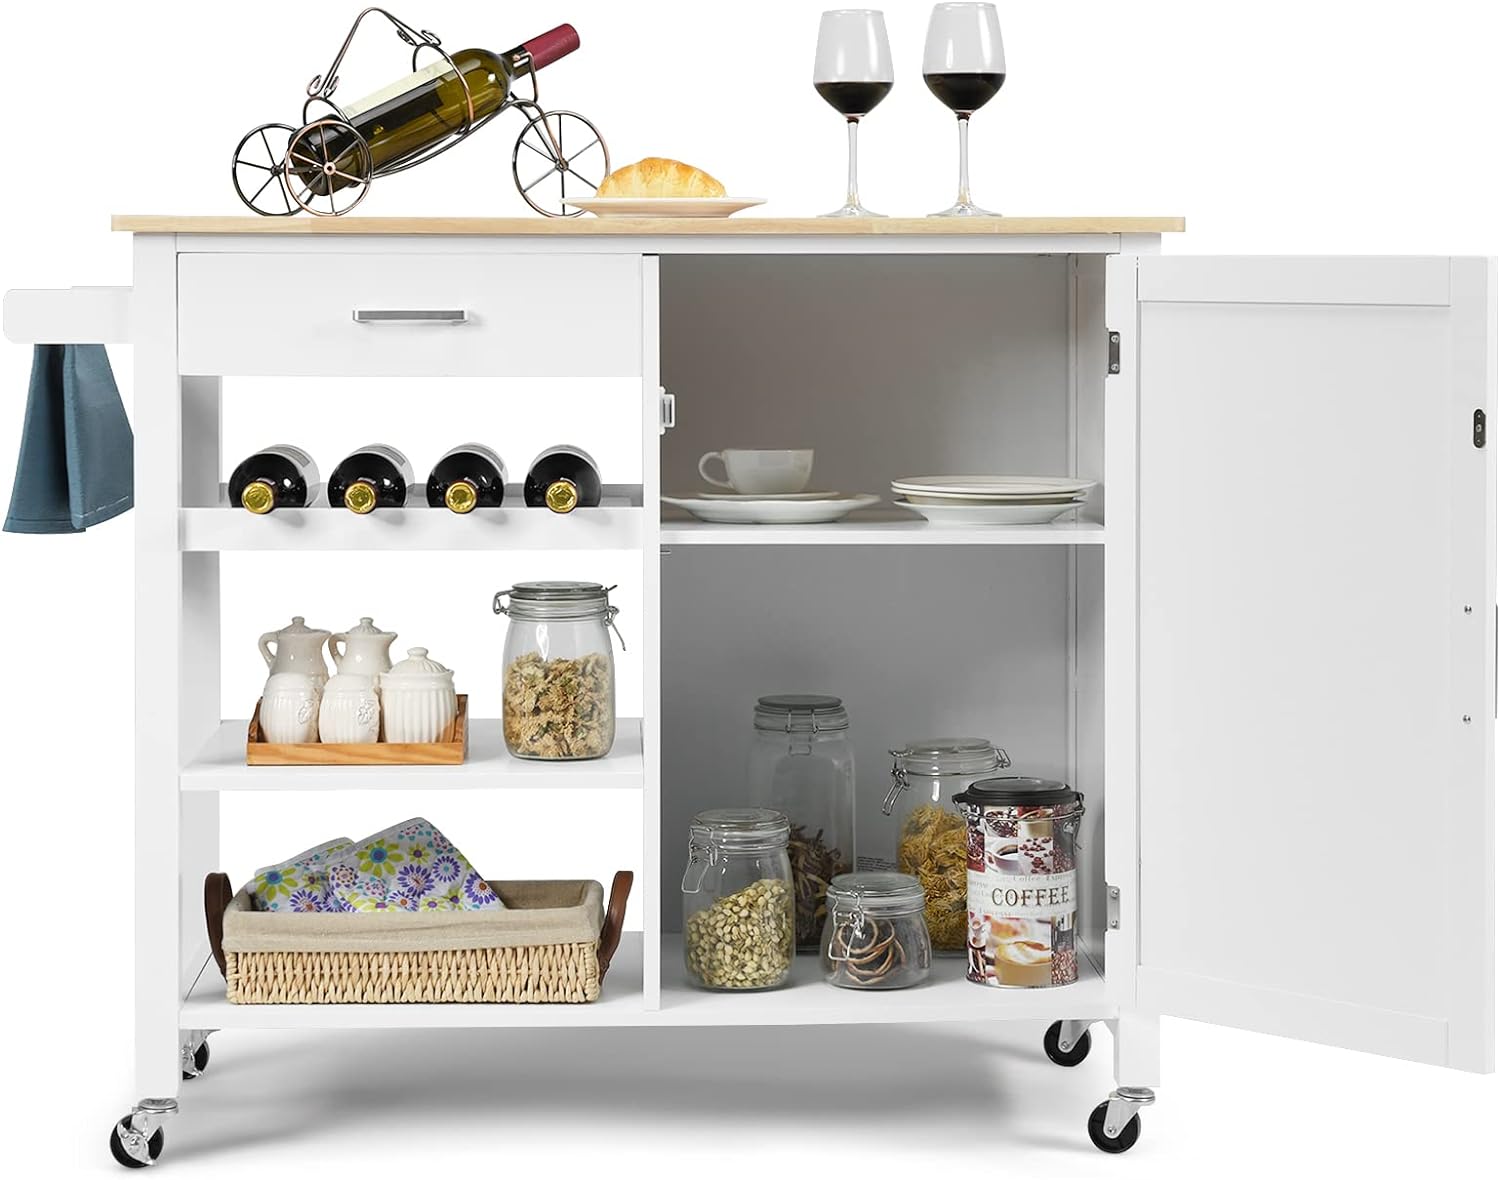 COSTWAY Kitchen Storage Island Cart on Wheels, Kitchen Trolley Cart with Wine Rack, Shelves and Towel Rack, 360Wheels & Detachable Tray, Kitchen Island for Dining Room, Living Room & Bedroom (White)